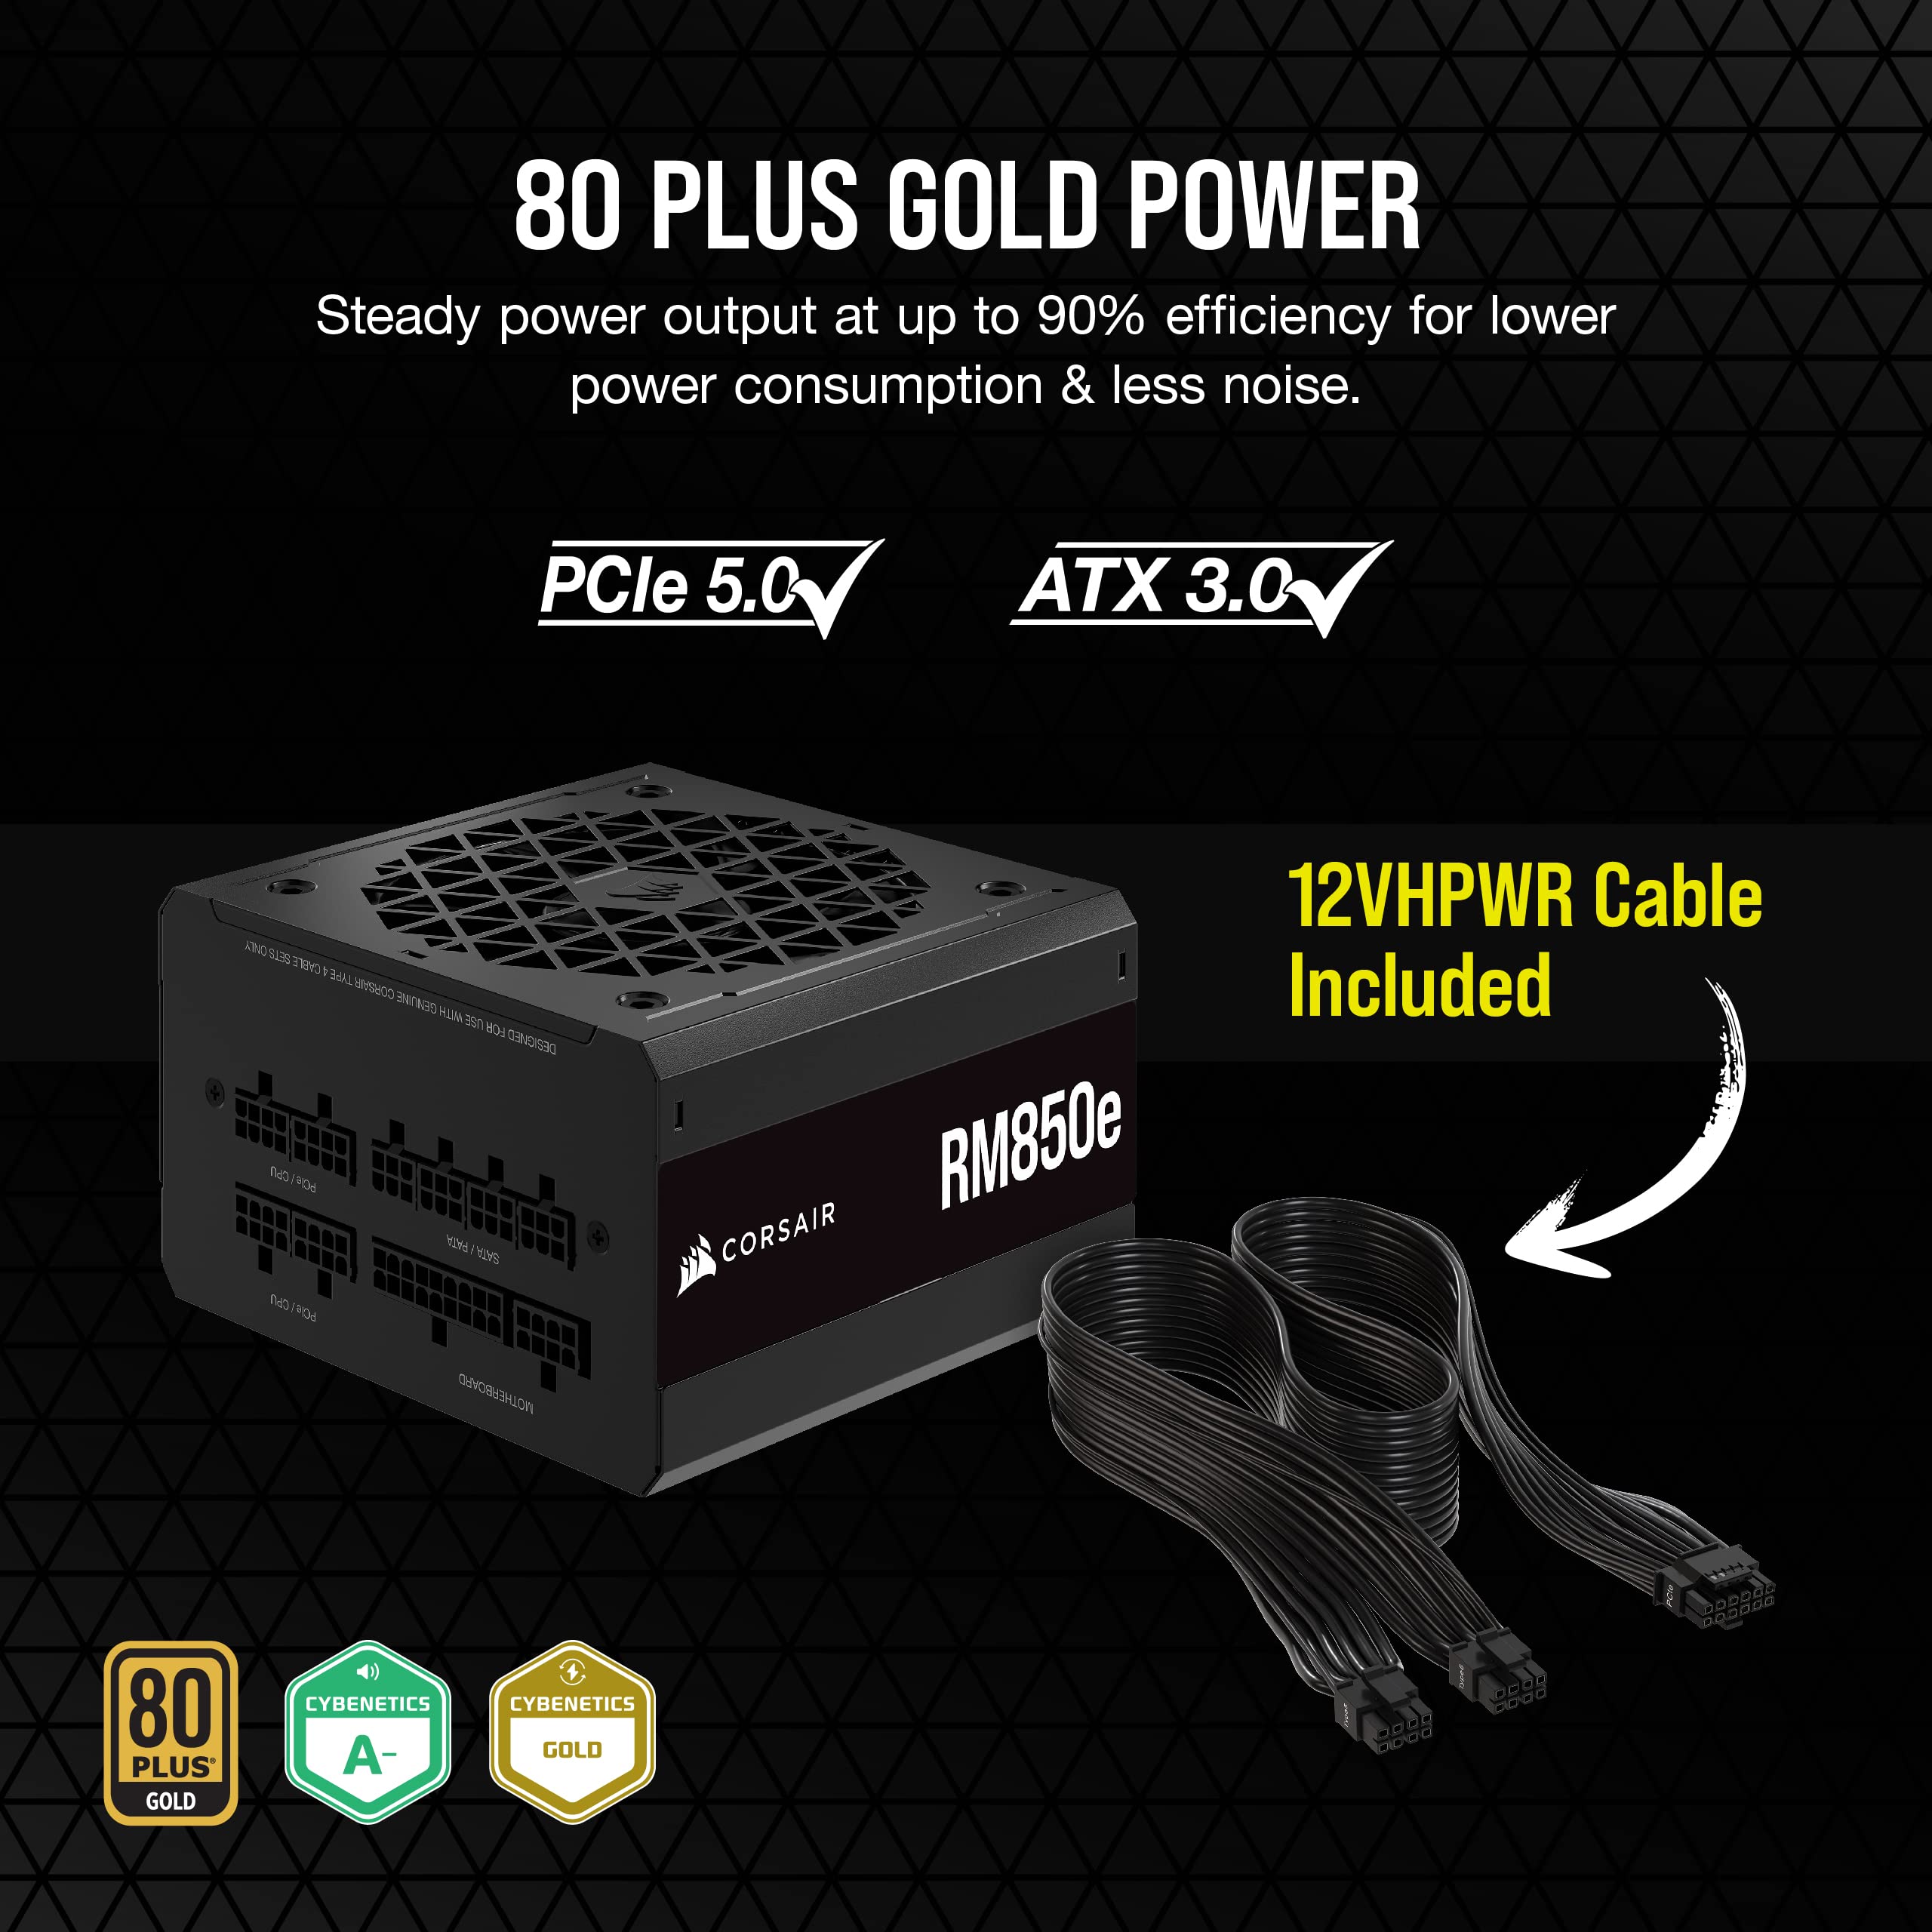 Corsair RM850e (2023) Fully Modular Low-Noise ATX Power Supply - ATX 3.0 & PCIe 5.0 Compliant - 105°C-Rated Capacitors - 80 Plus Gold Efficiency - Modern Standby Support - Black